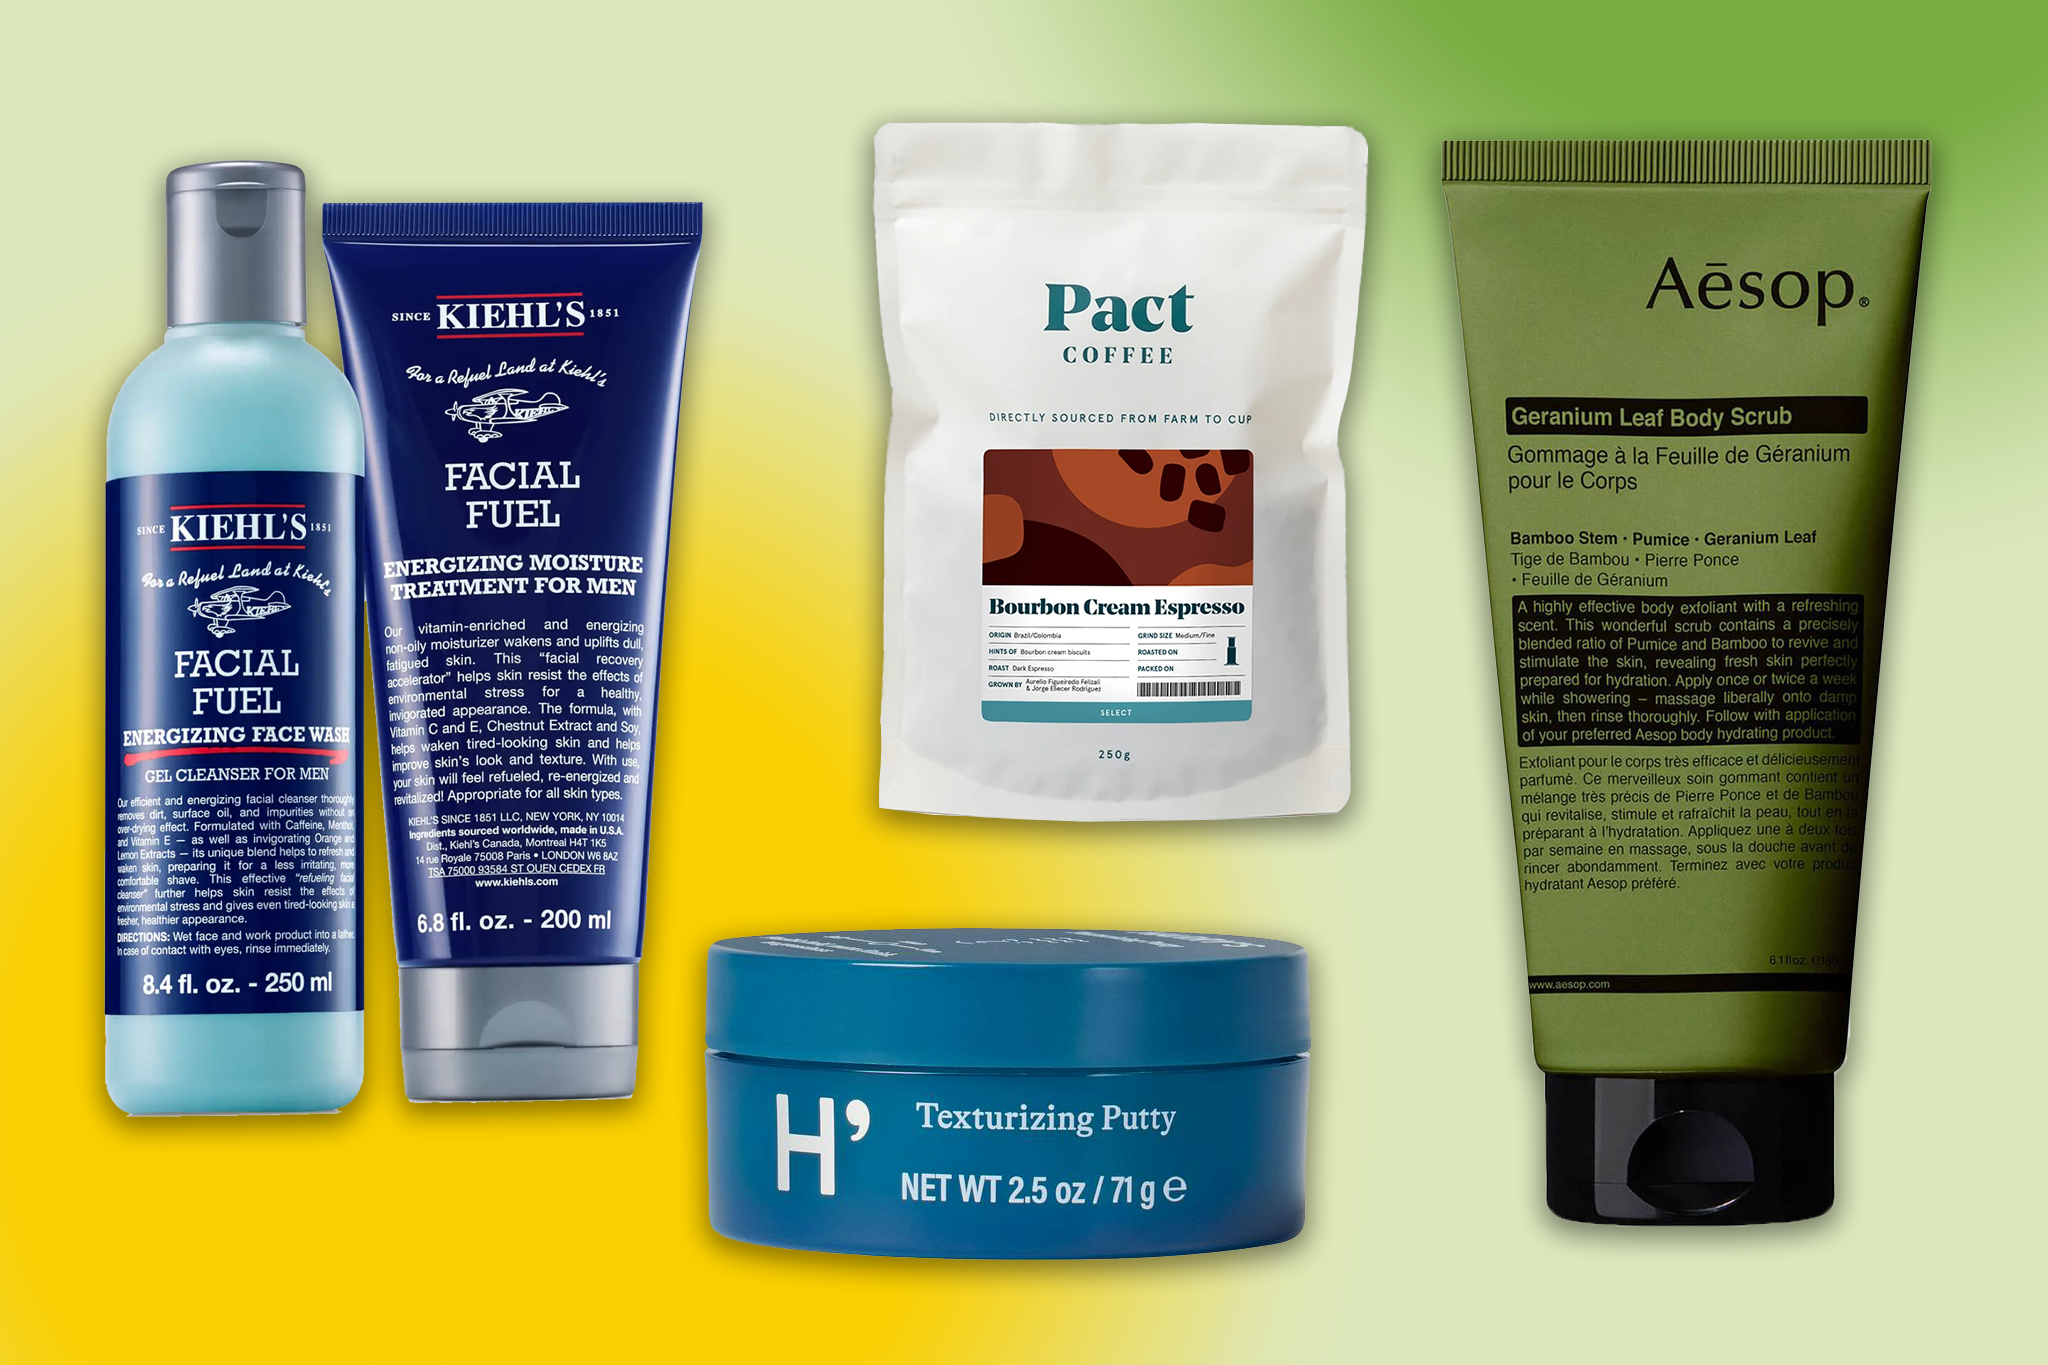 Stocking Stuffers for Men- Essentials & Grooming - Simply